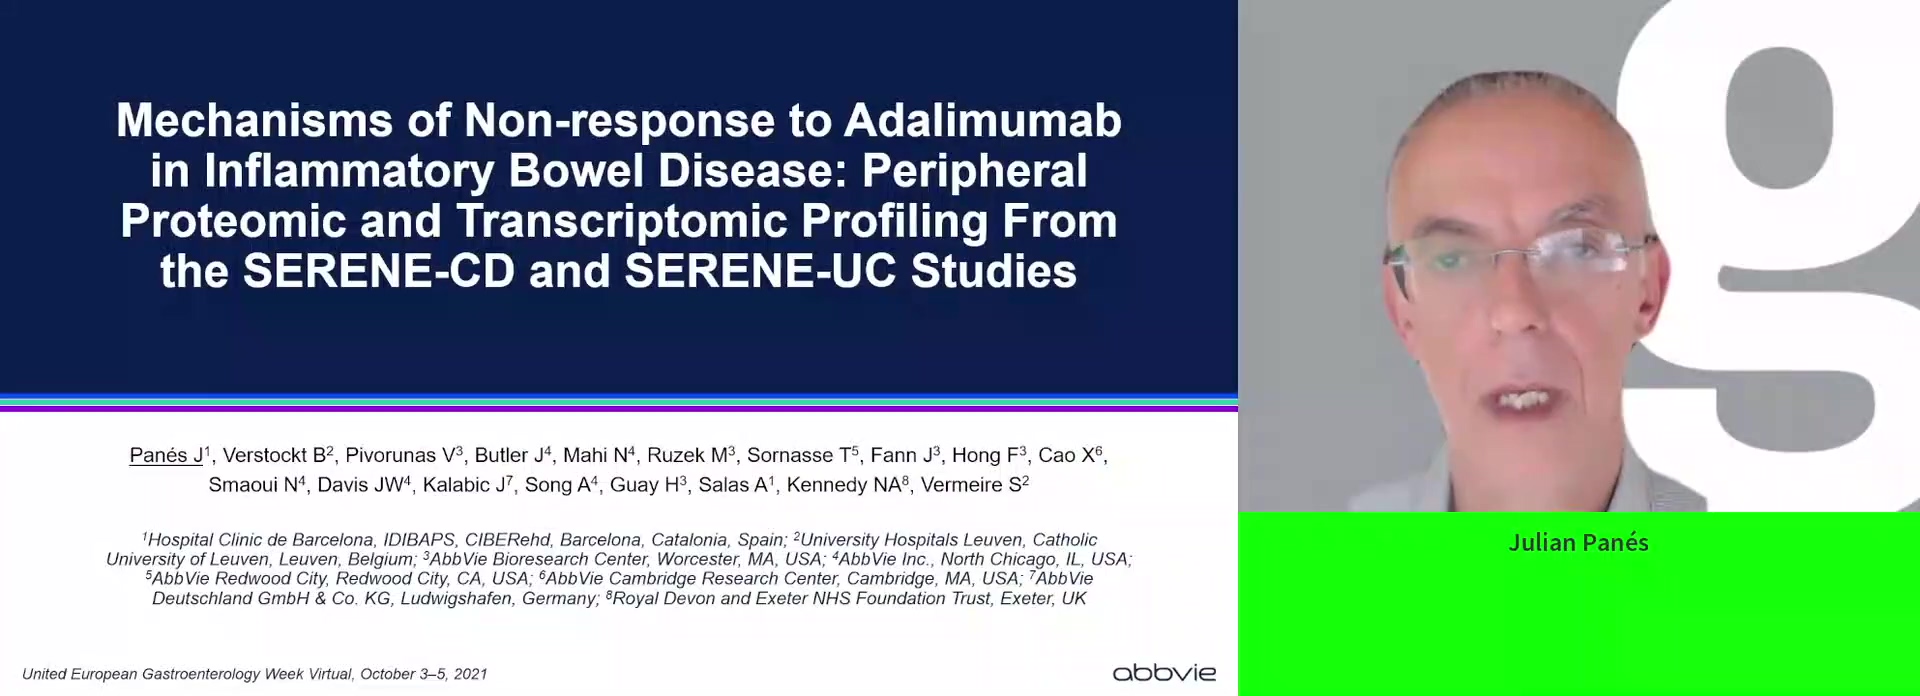 MECHANISMS OF NON-RESPONSE TO ADALIMUMAB IN INFLAMMATORY BOWEL DISEASE: PERIPHERAL PROTEOMIC AND TRANSCRIPTOMIC PROFILING FROM THE SERENE-CD AND SERENE-UC STUDIES